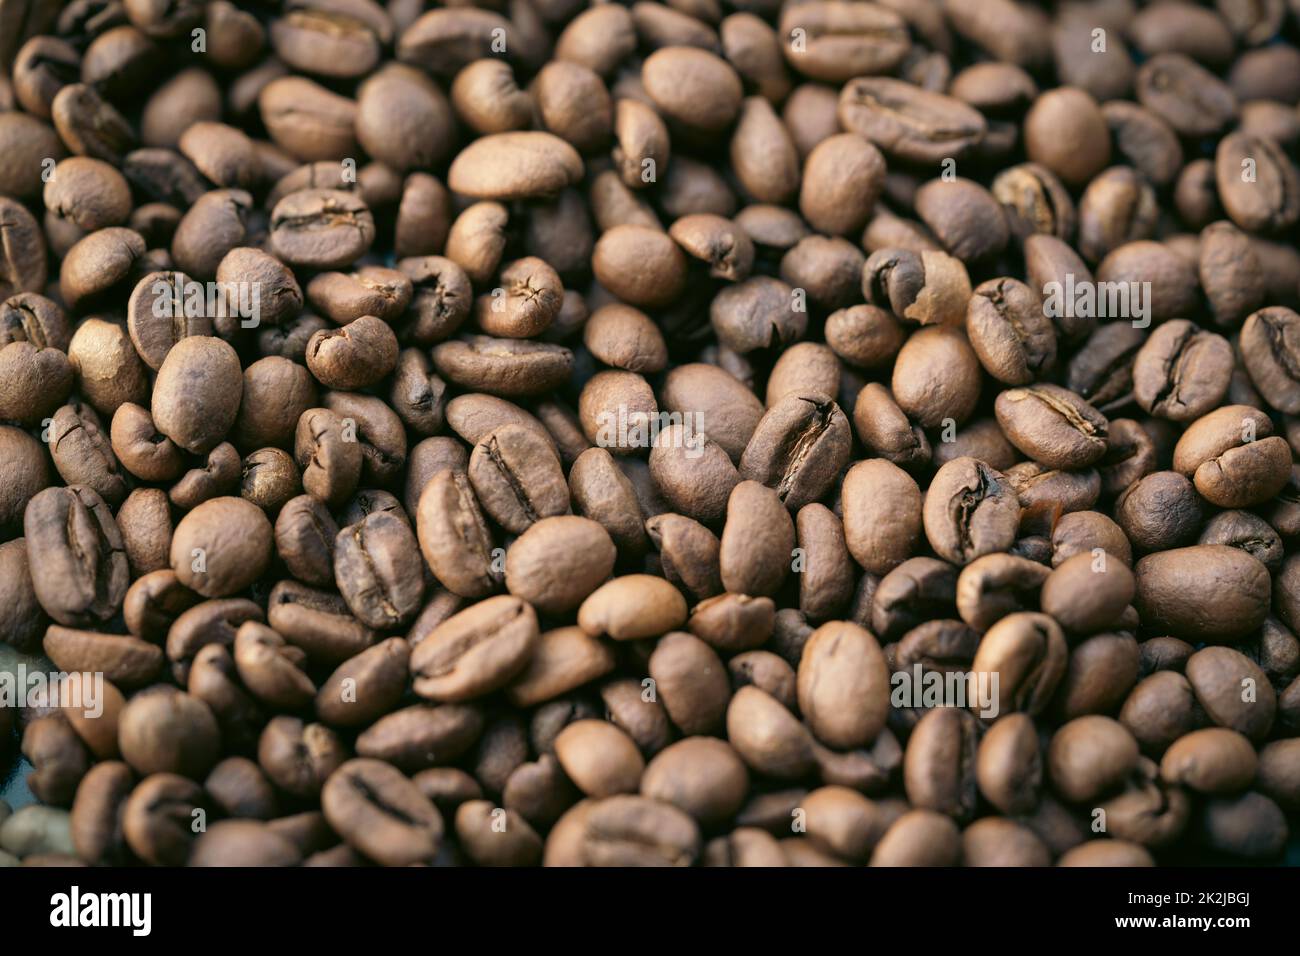 A pile of natural brown roasted coffee beans. Stock Photo